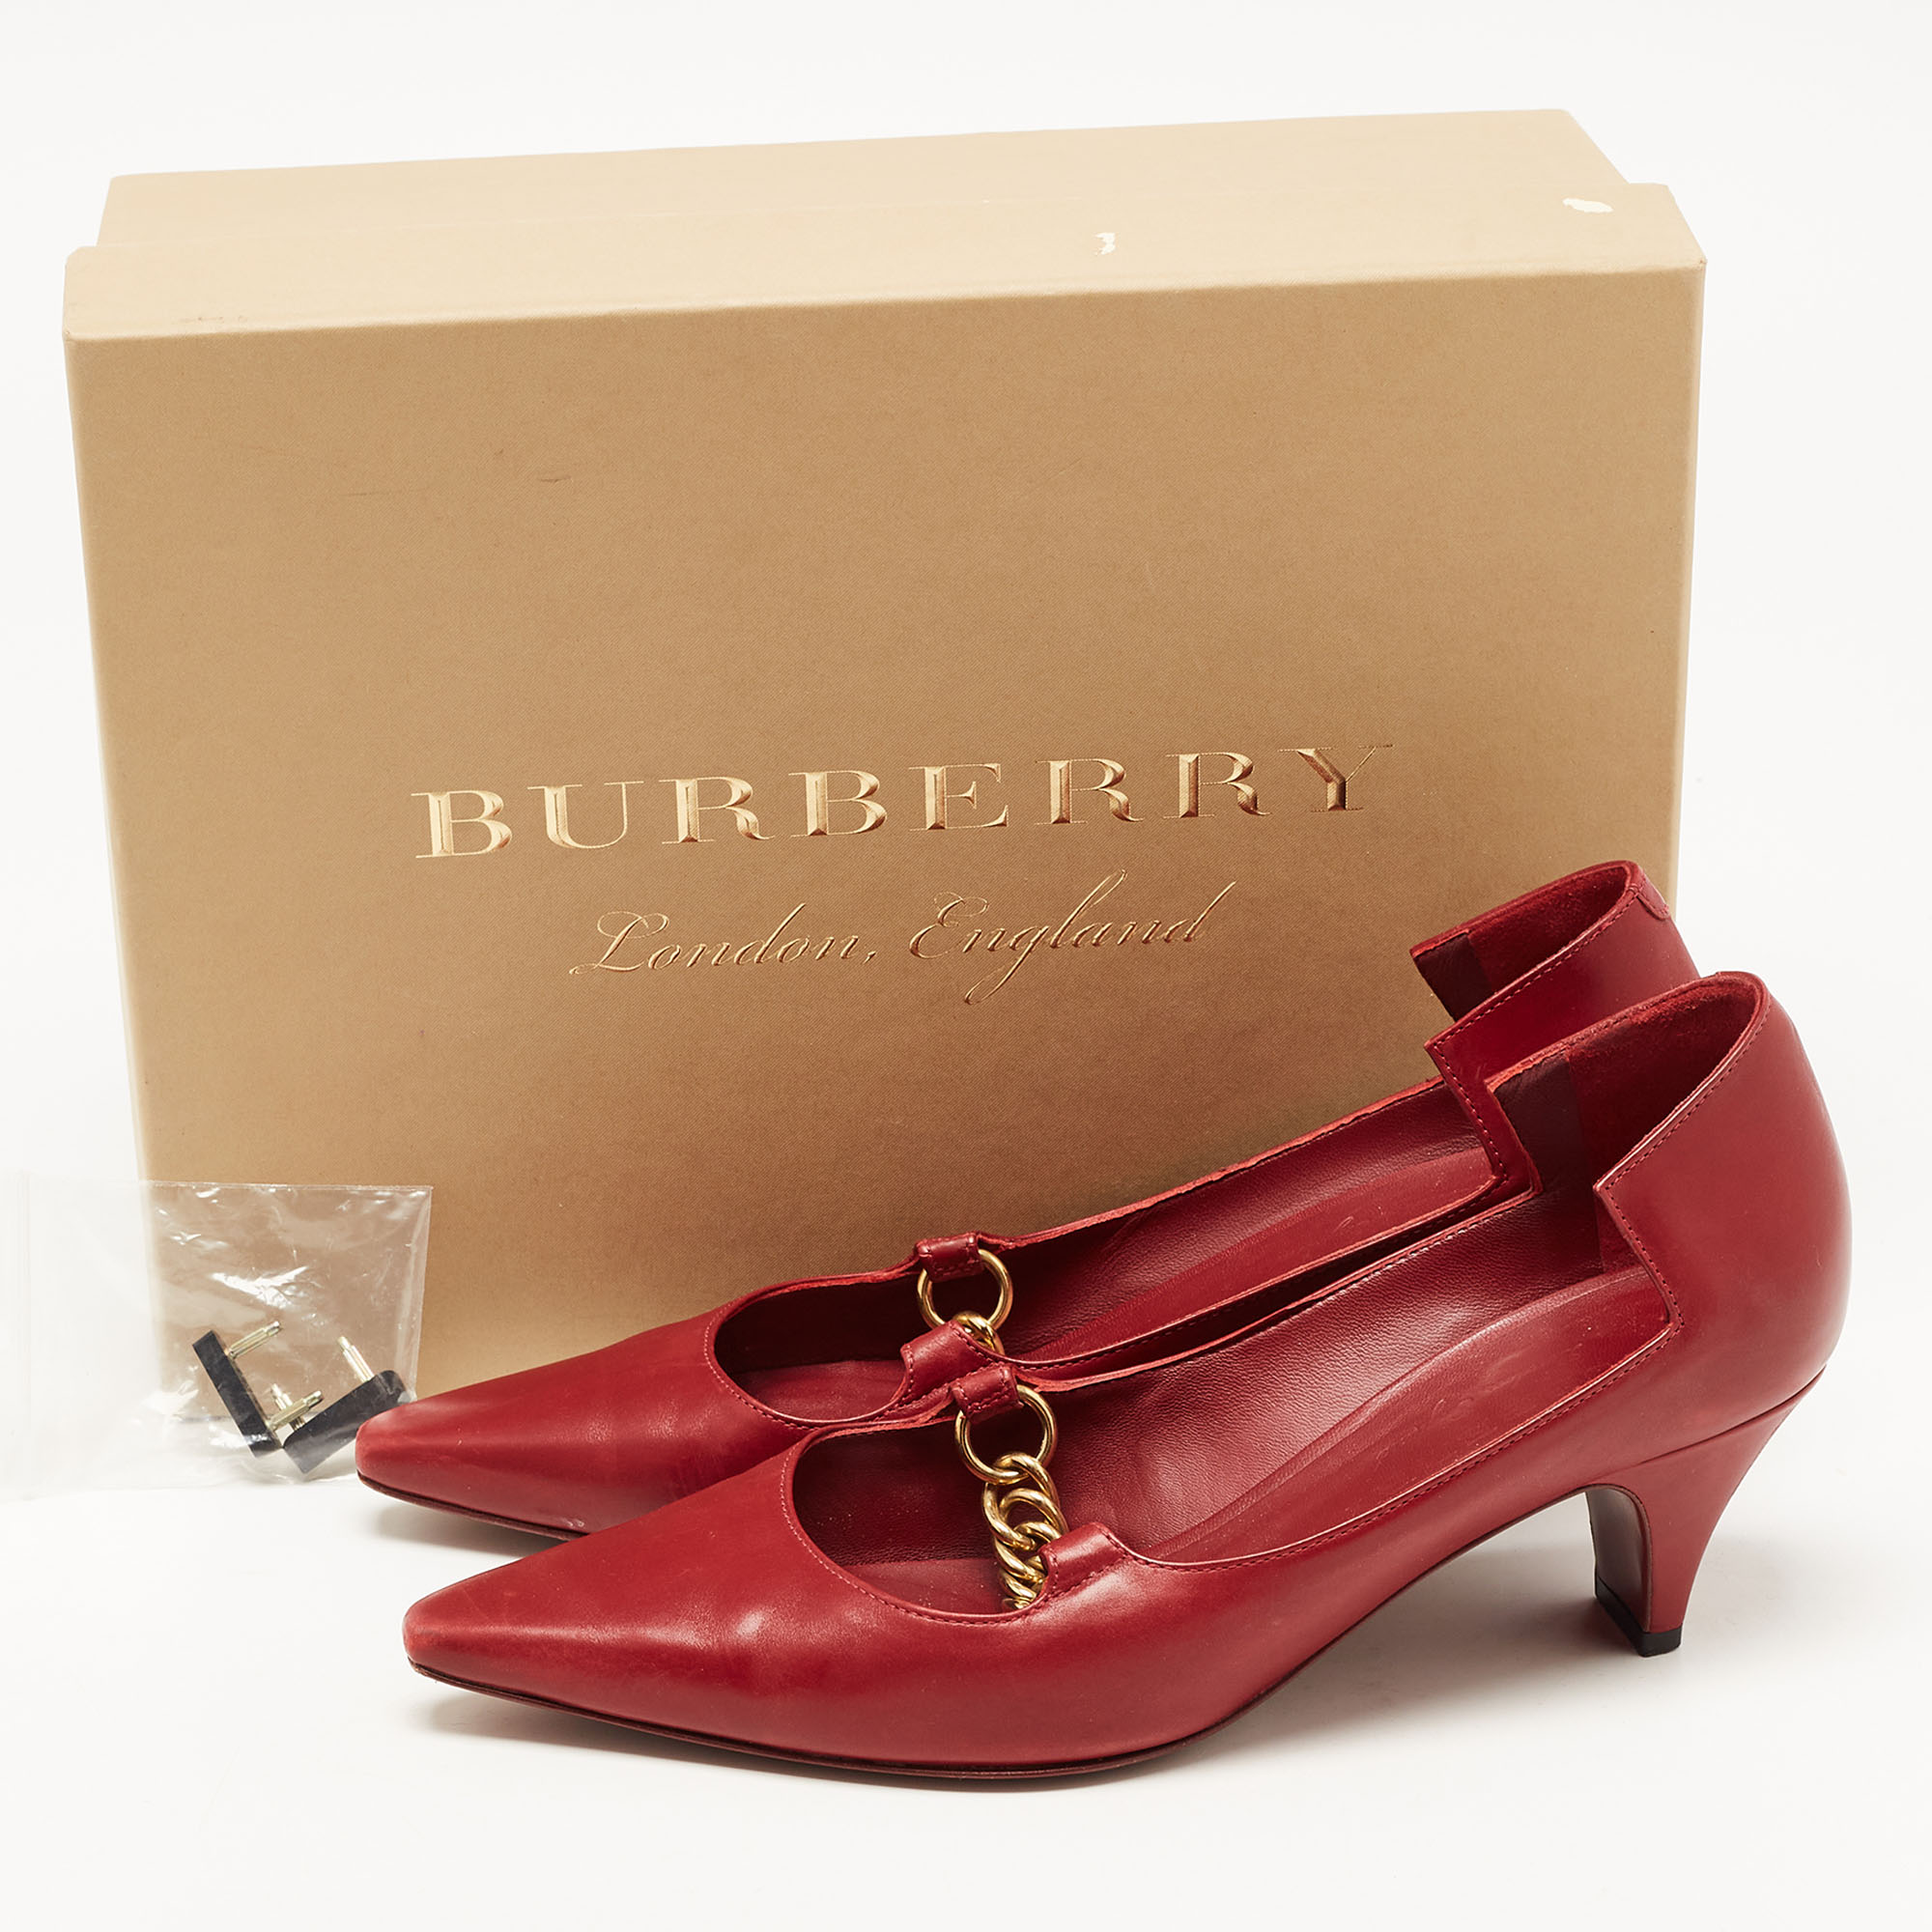 Burberry Red Leather Chain Embellished Pumps Size 38